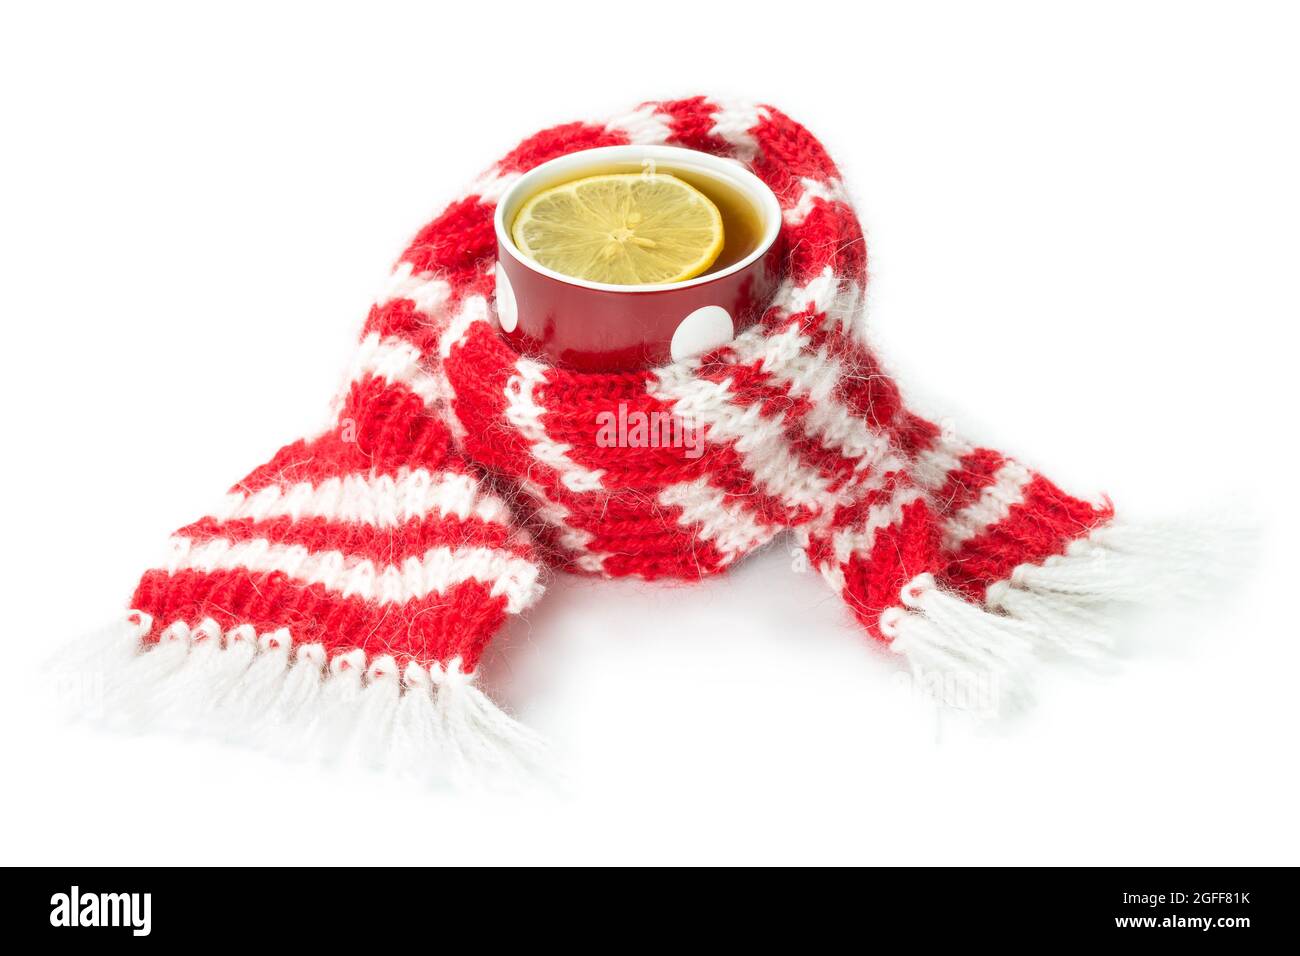 Red wool scarf, wrapped around a cup of tea, isolated on a white background Stock Photo